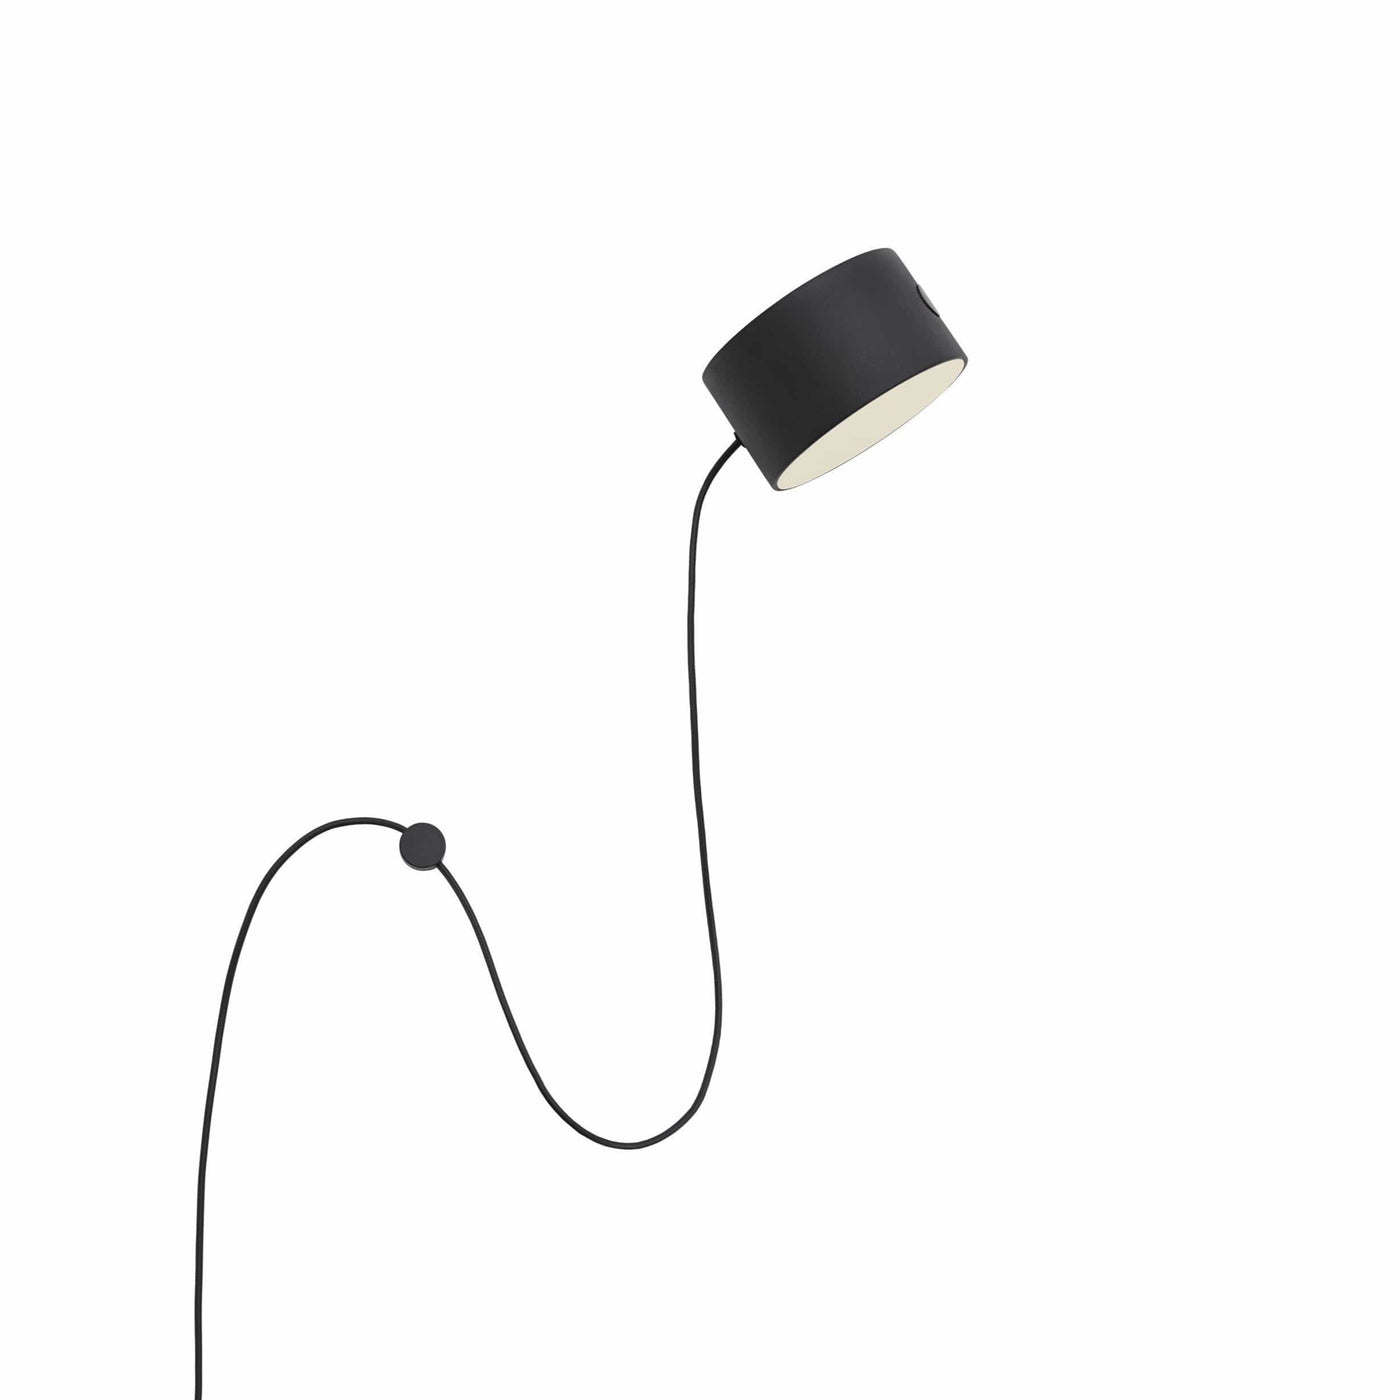 Muuto Post Wall Lamp in black, available from someday designs